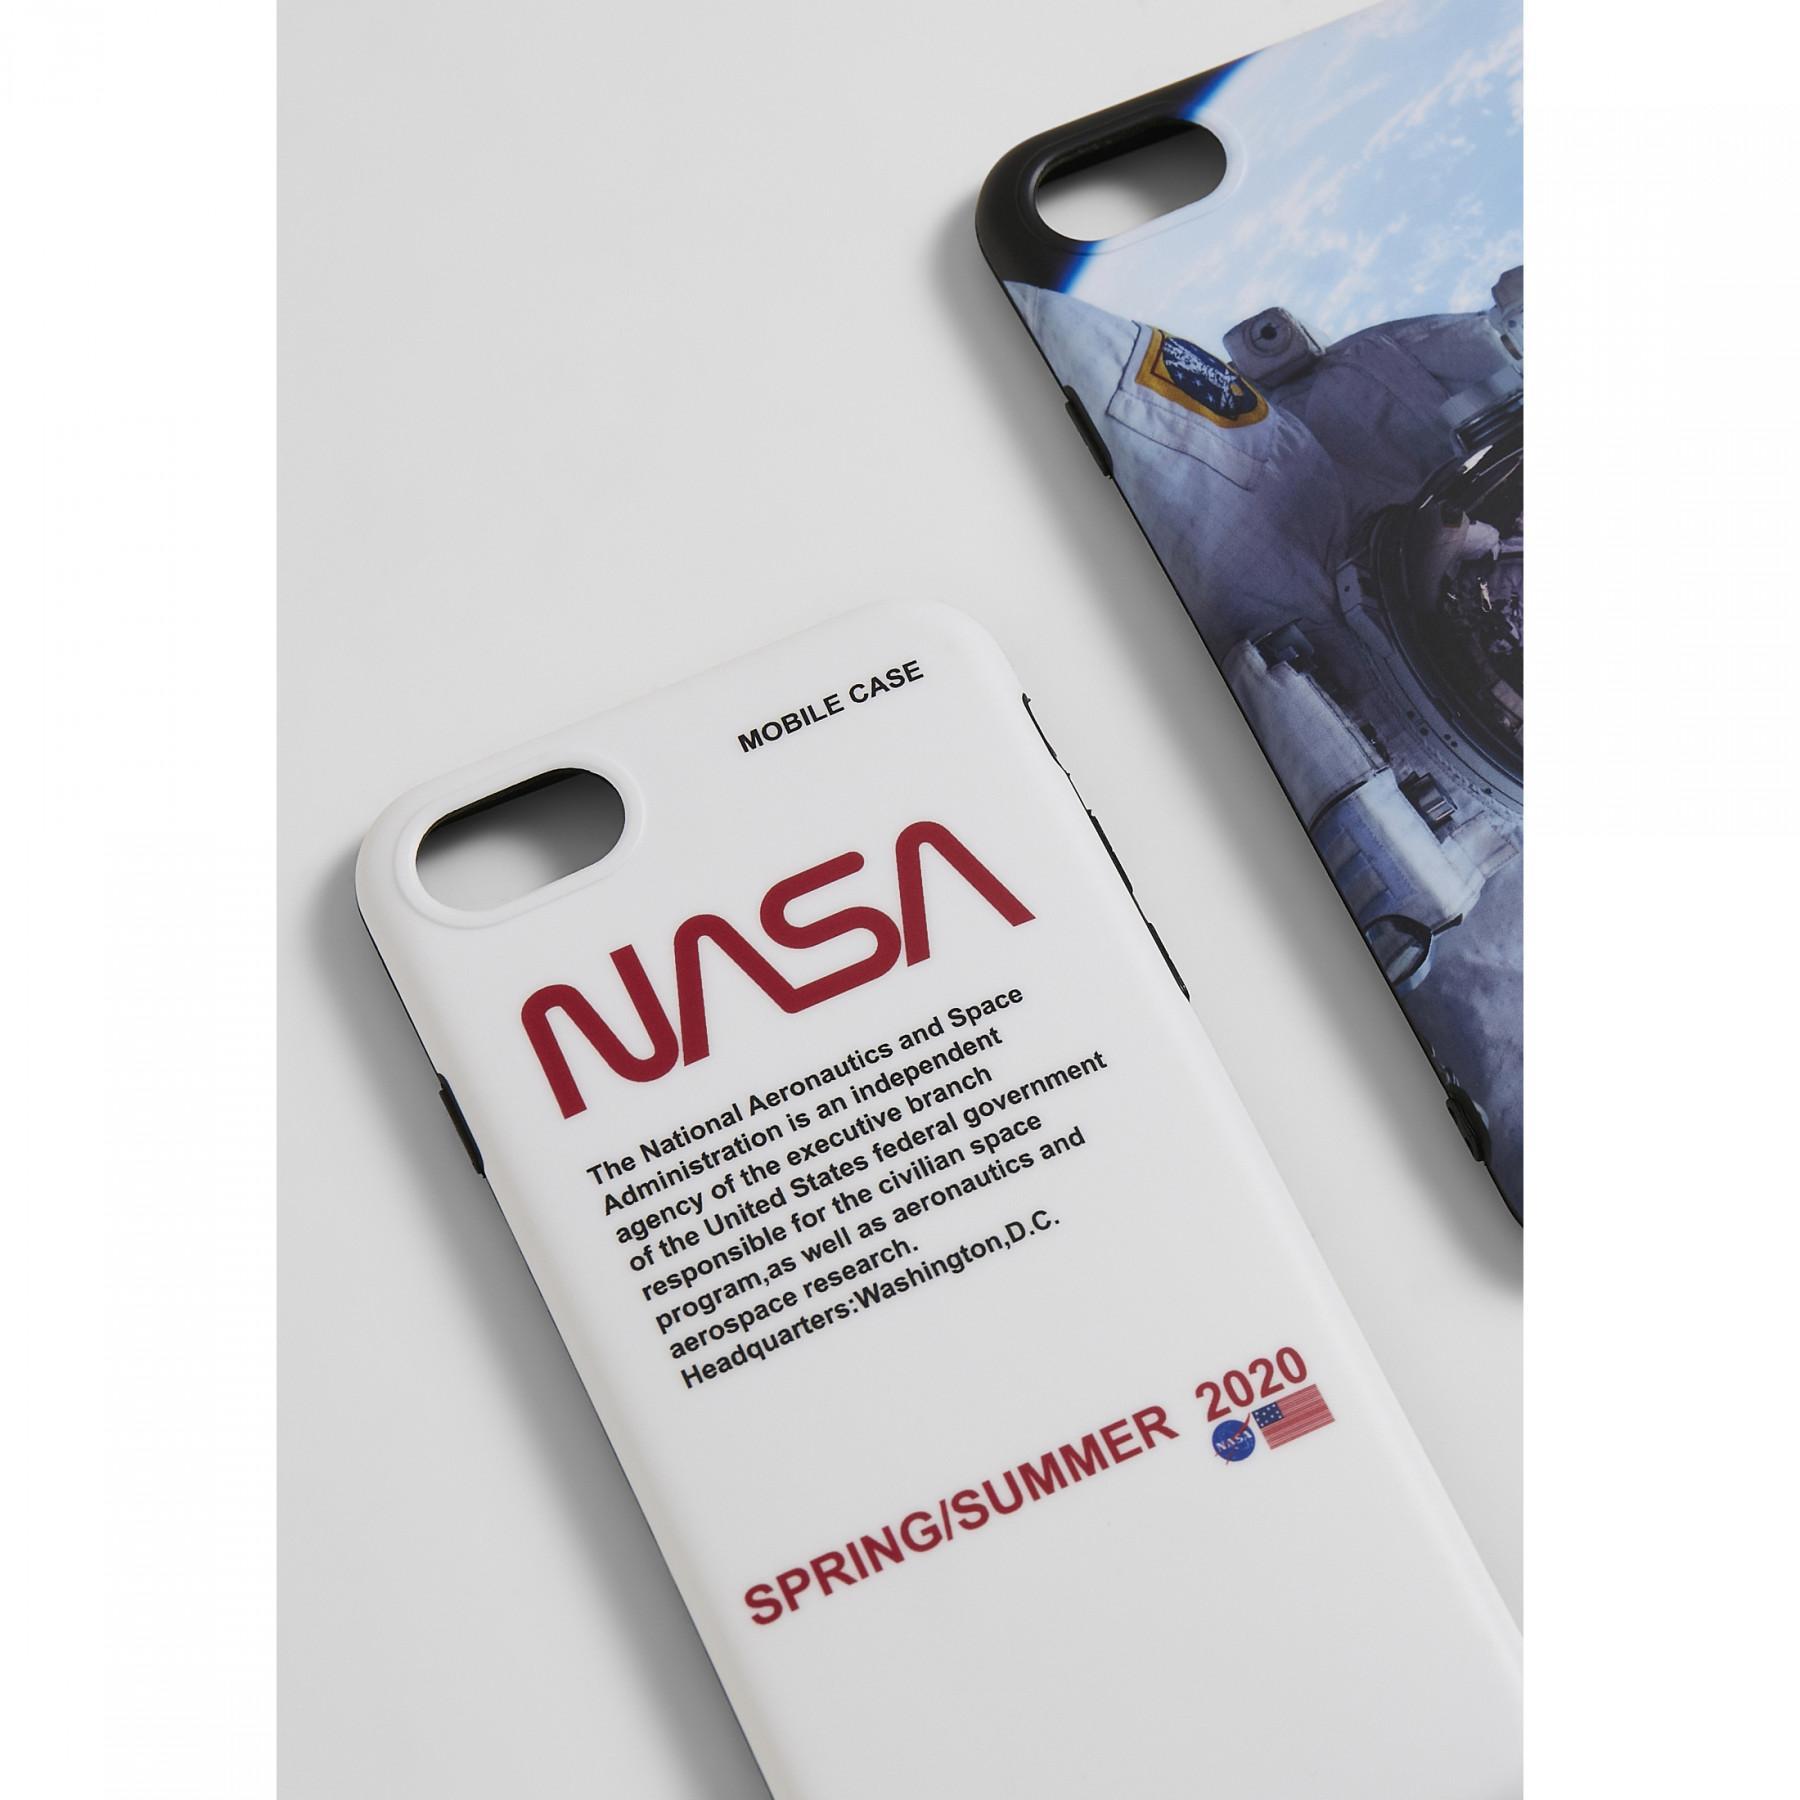 Case for iphone 8 Mister Tee nasa handycase (2pcs)